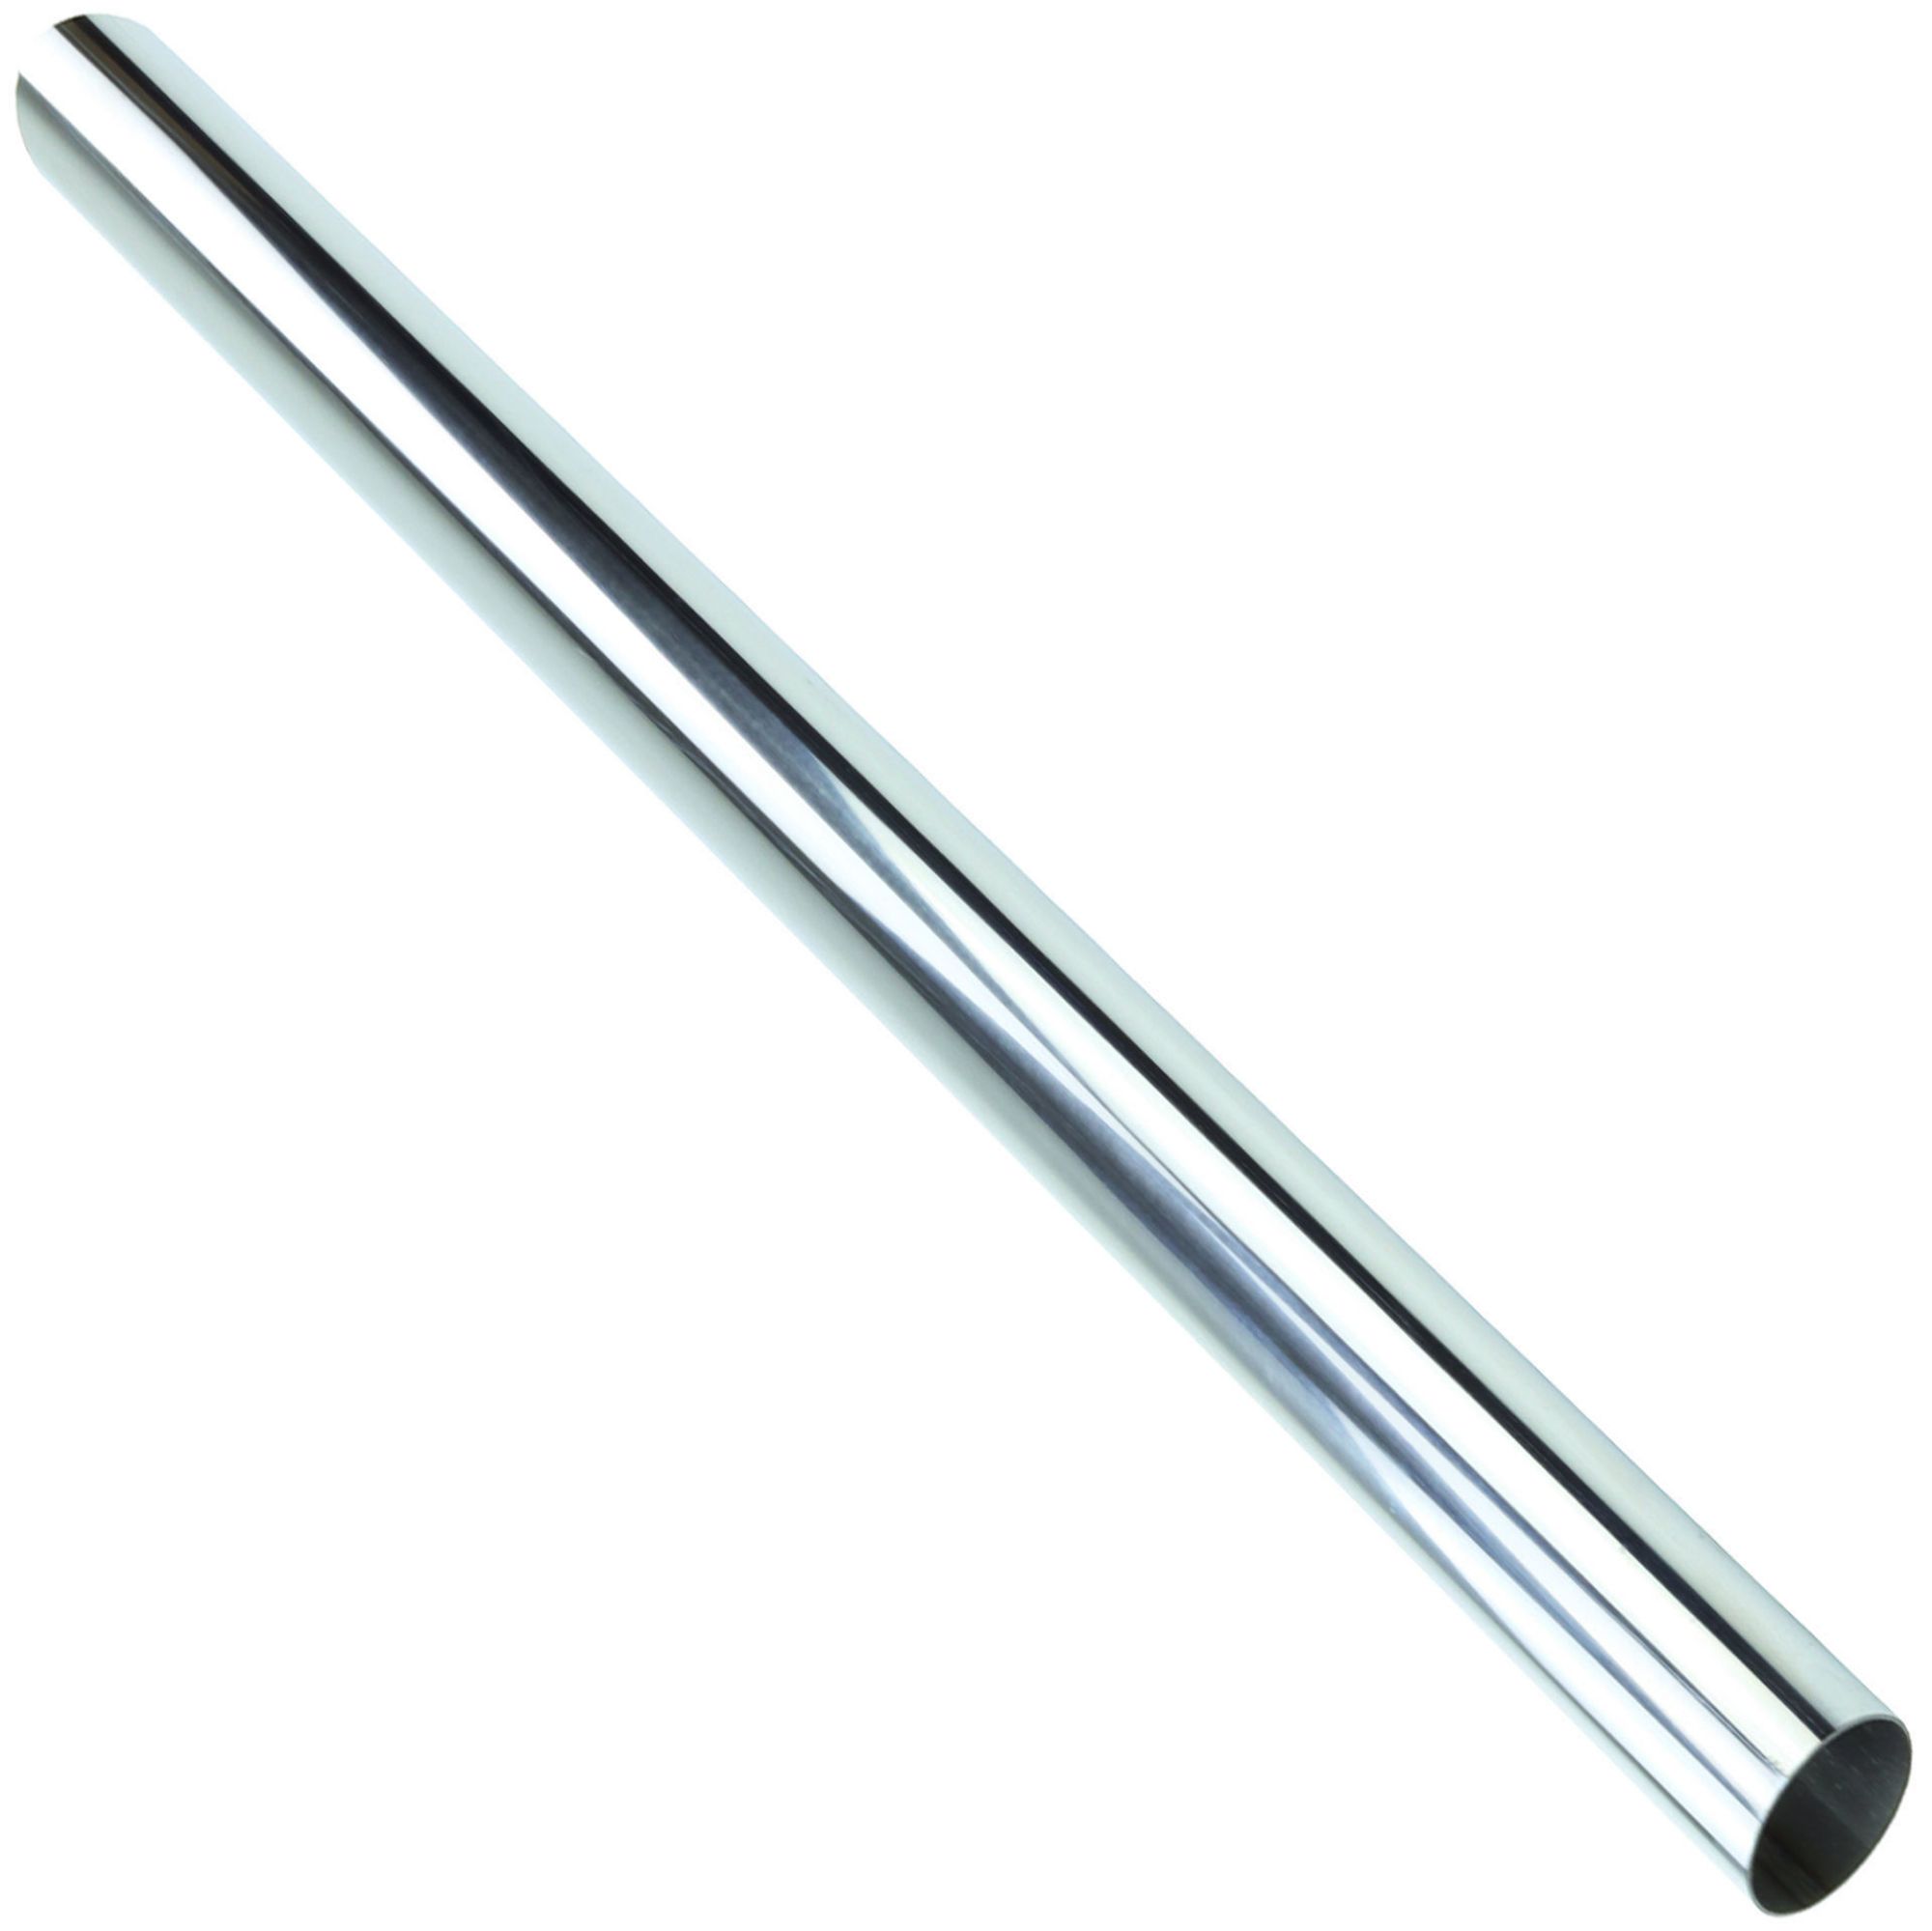 TOTALFLOW 47-409-105-15 Exhaust Pipe - Tube Replacement | 1.5 Inch - OD